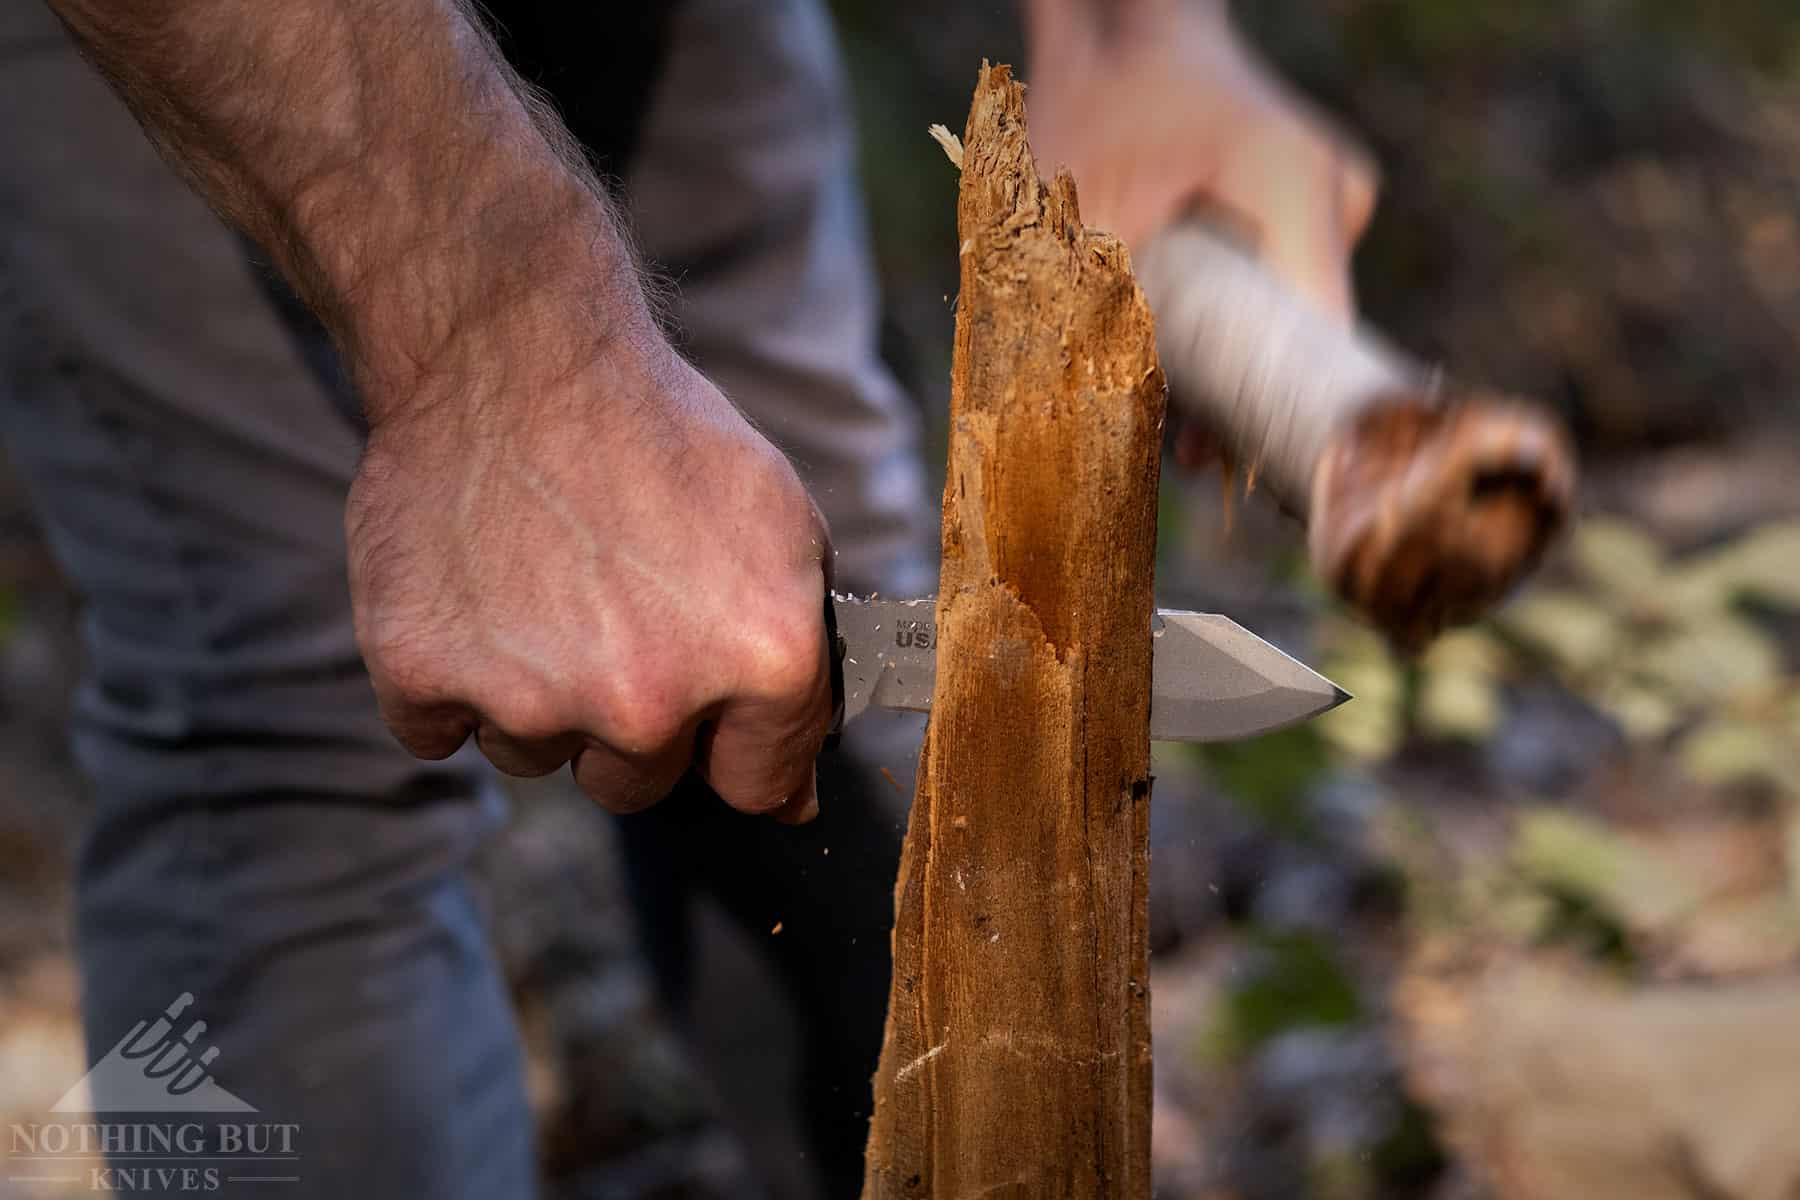 The blade geaometry and tough steel make the Backpacker's Bowie ideal for tackling woodworking tasks around the campsite.